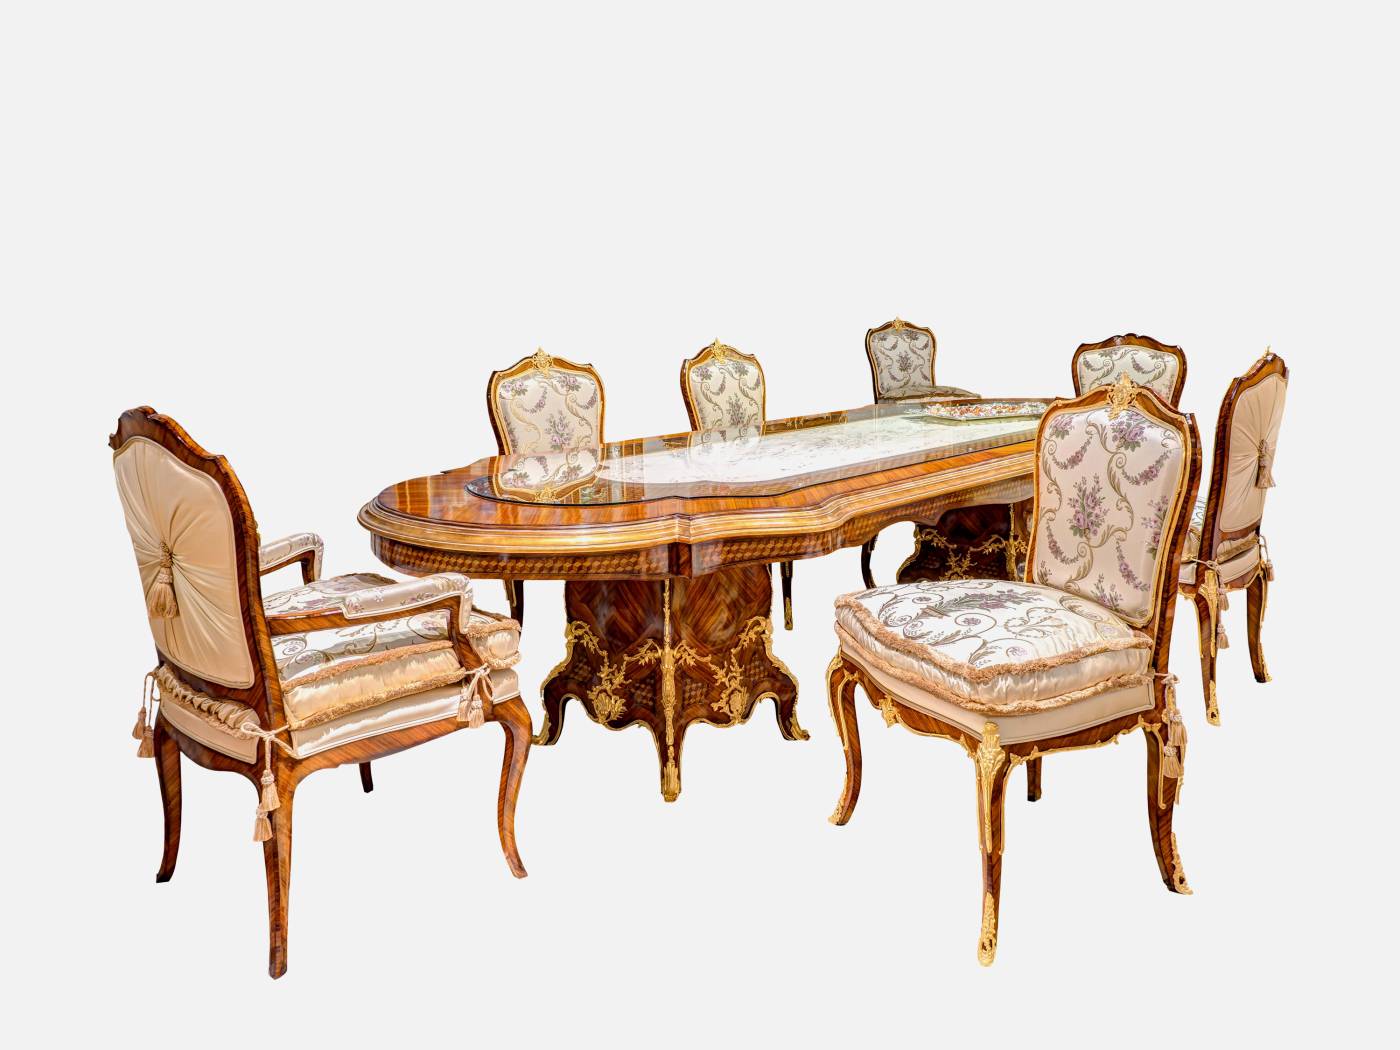 ART. 1094-5 – Discover the elegance of luxury classic Tables made in Italy by C.G. Capelletti. Luxury classic furniture that combines style and craftsmanship.